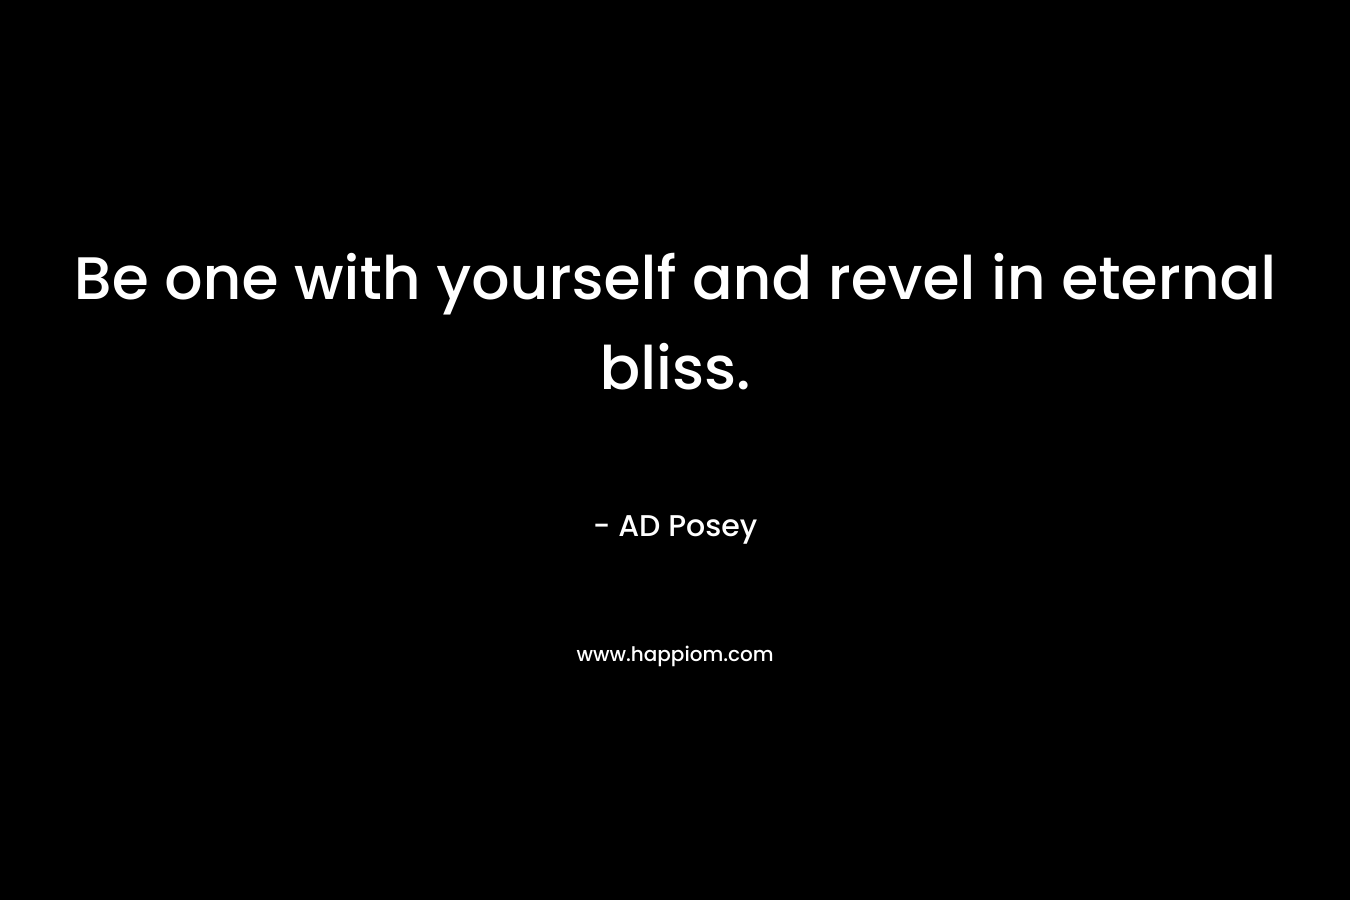 Be one with yourself and revel in eternal bliss.